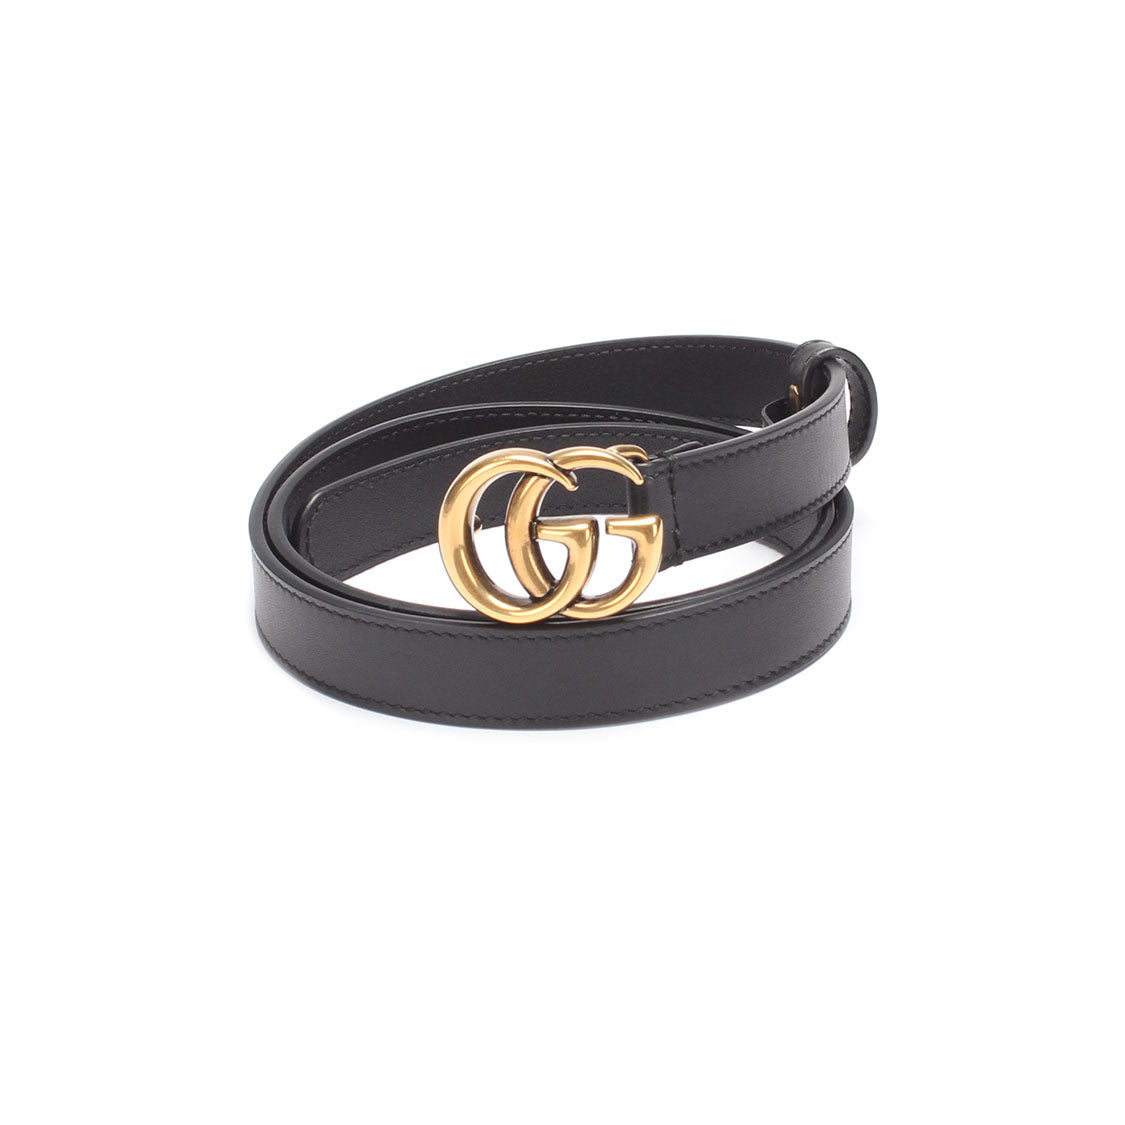 GG Marmont Leather Belt 409417